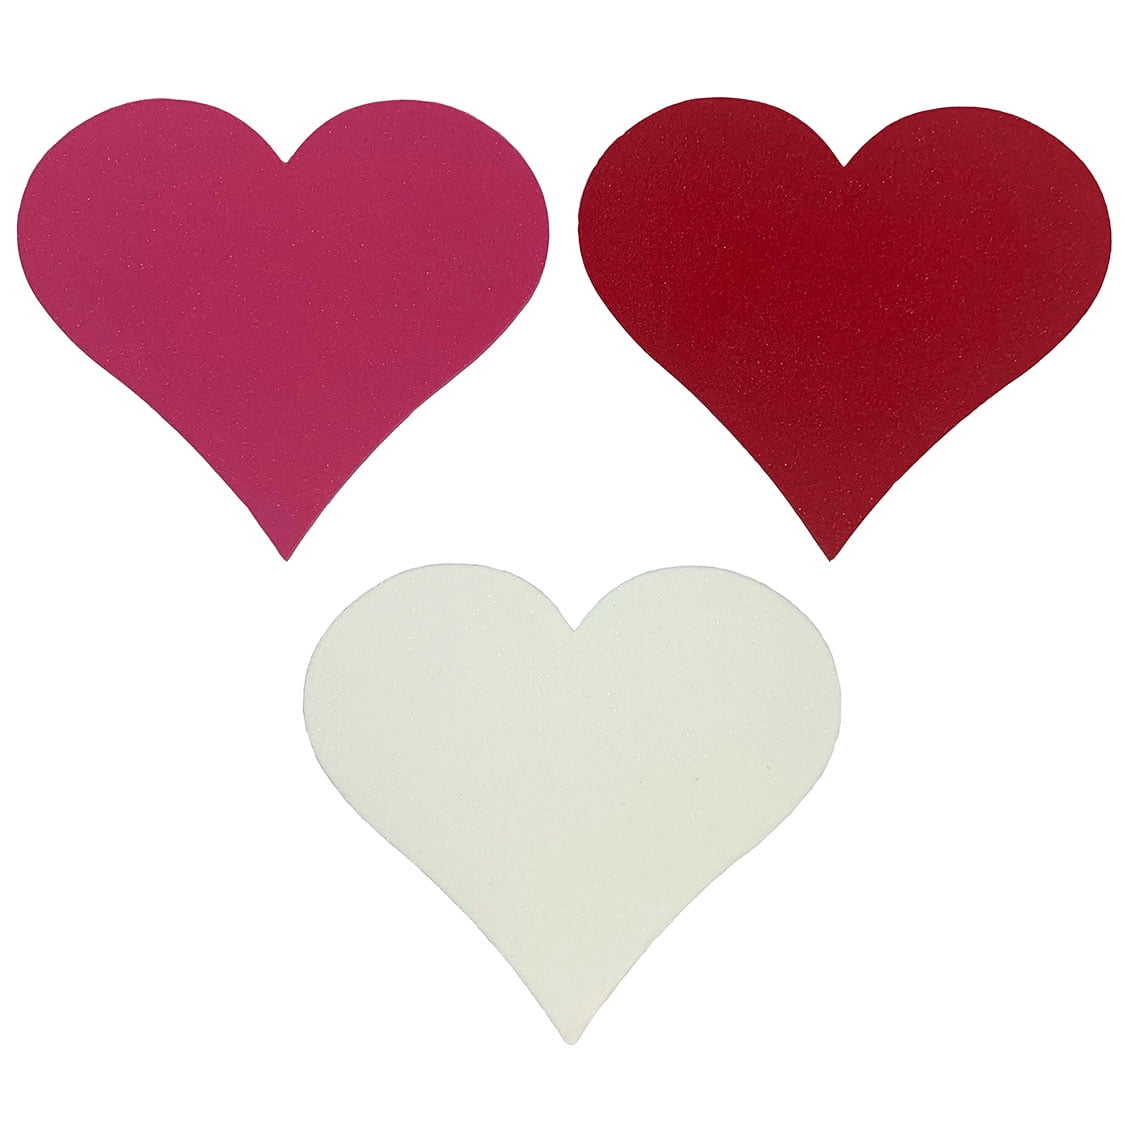 12 Pack 8in Foam Heart Shapes (Red, Purple, Pink, Crafts, Projects)